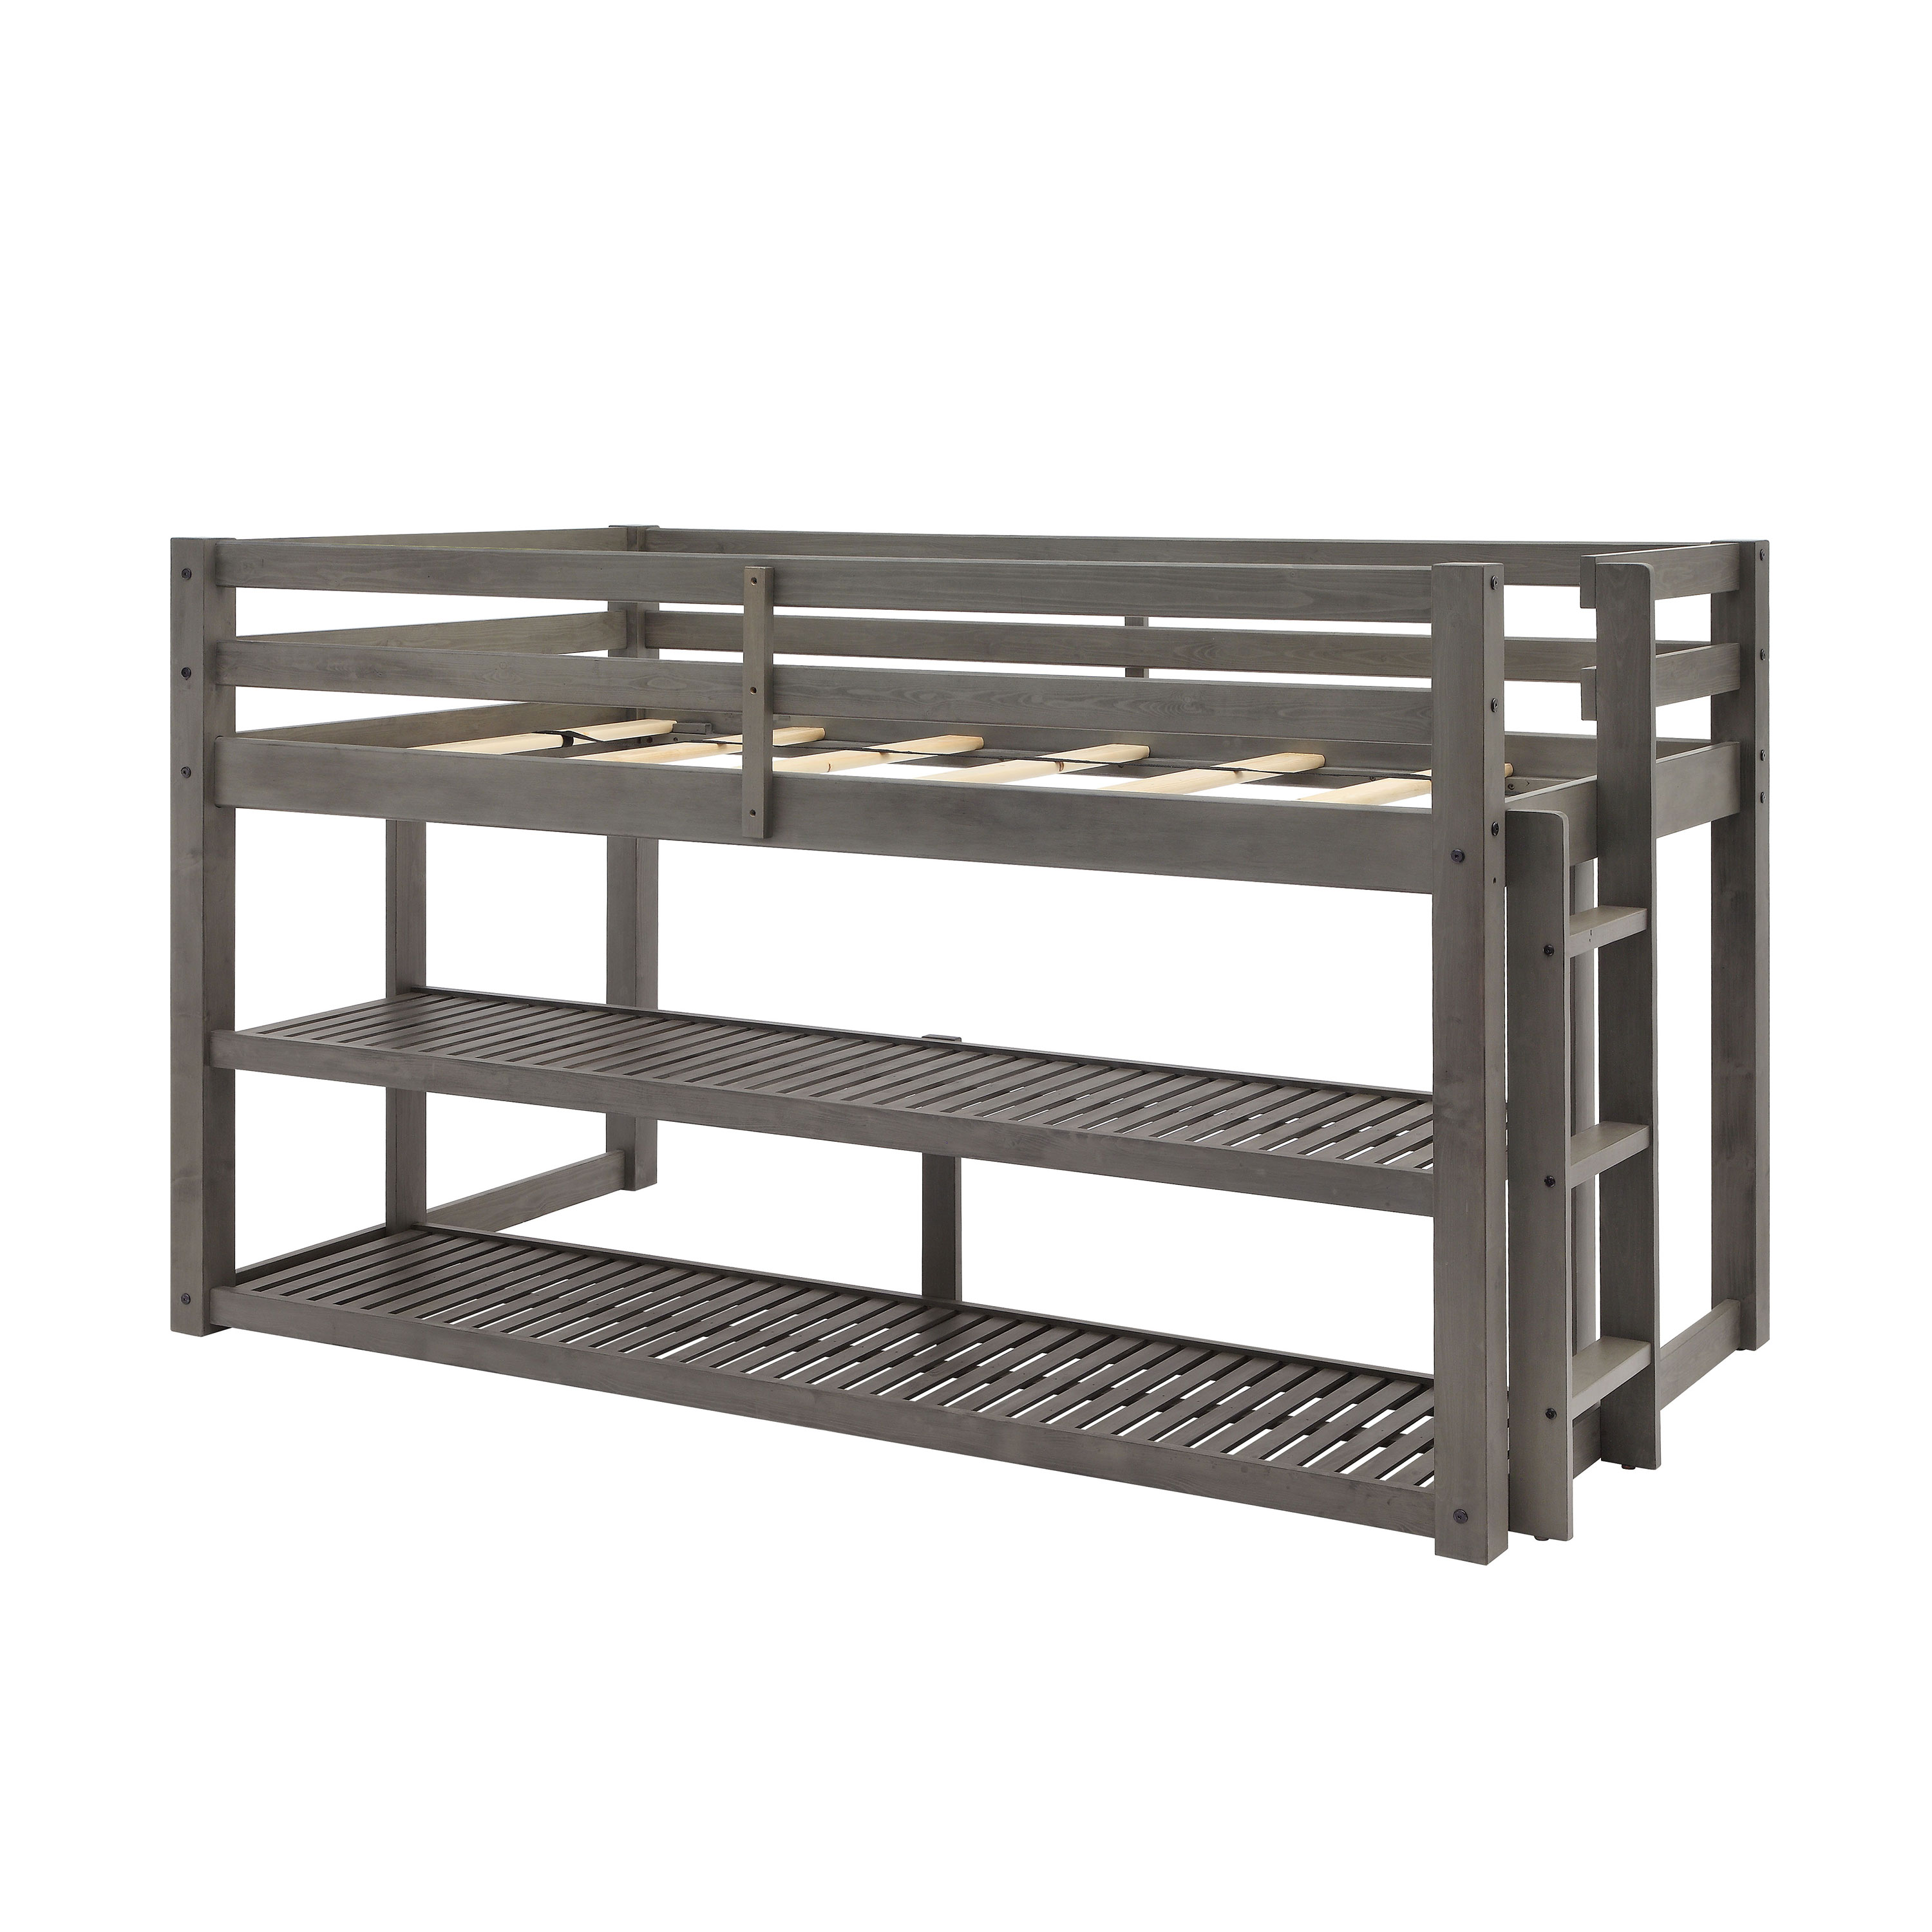 Better Homes and Gardens Greer Twin Loft Storage Bed, Gray - image 5 of 11